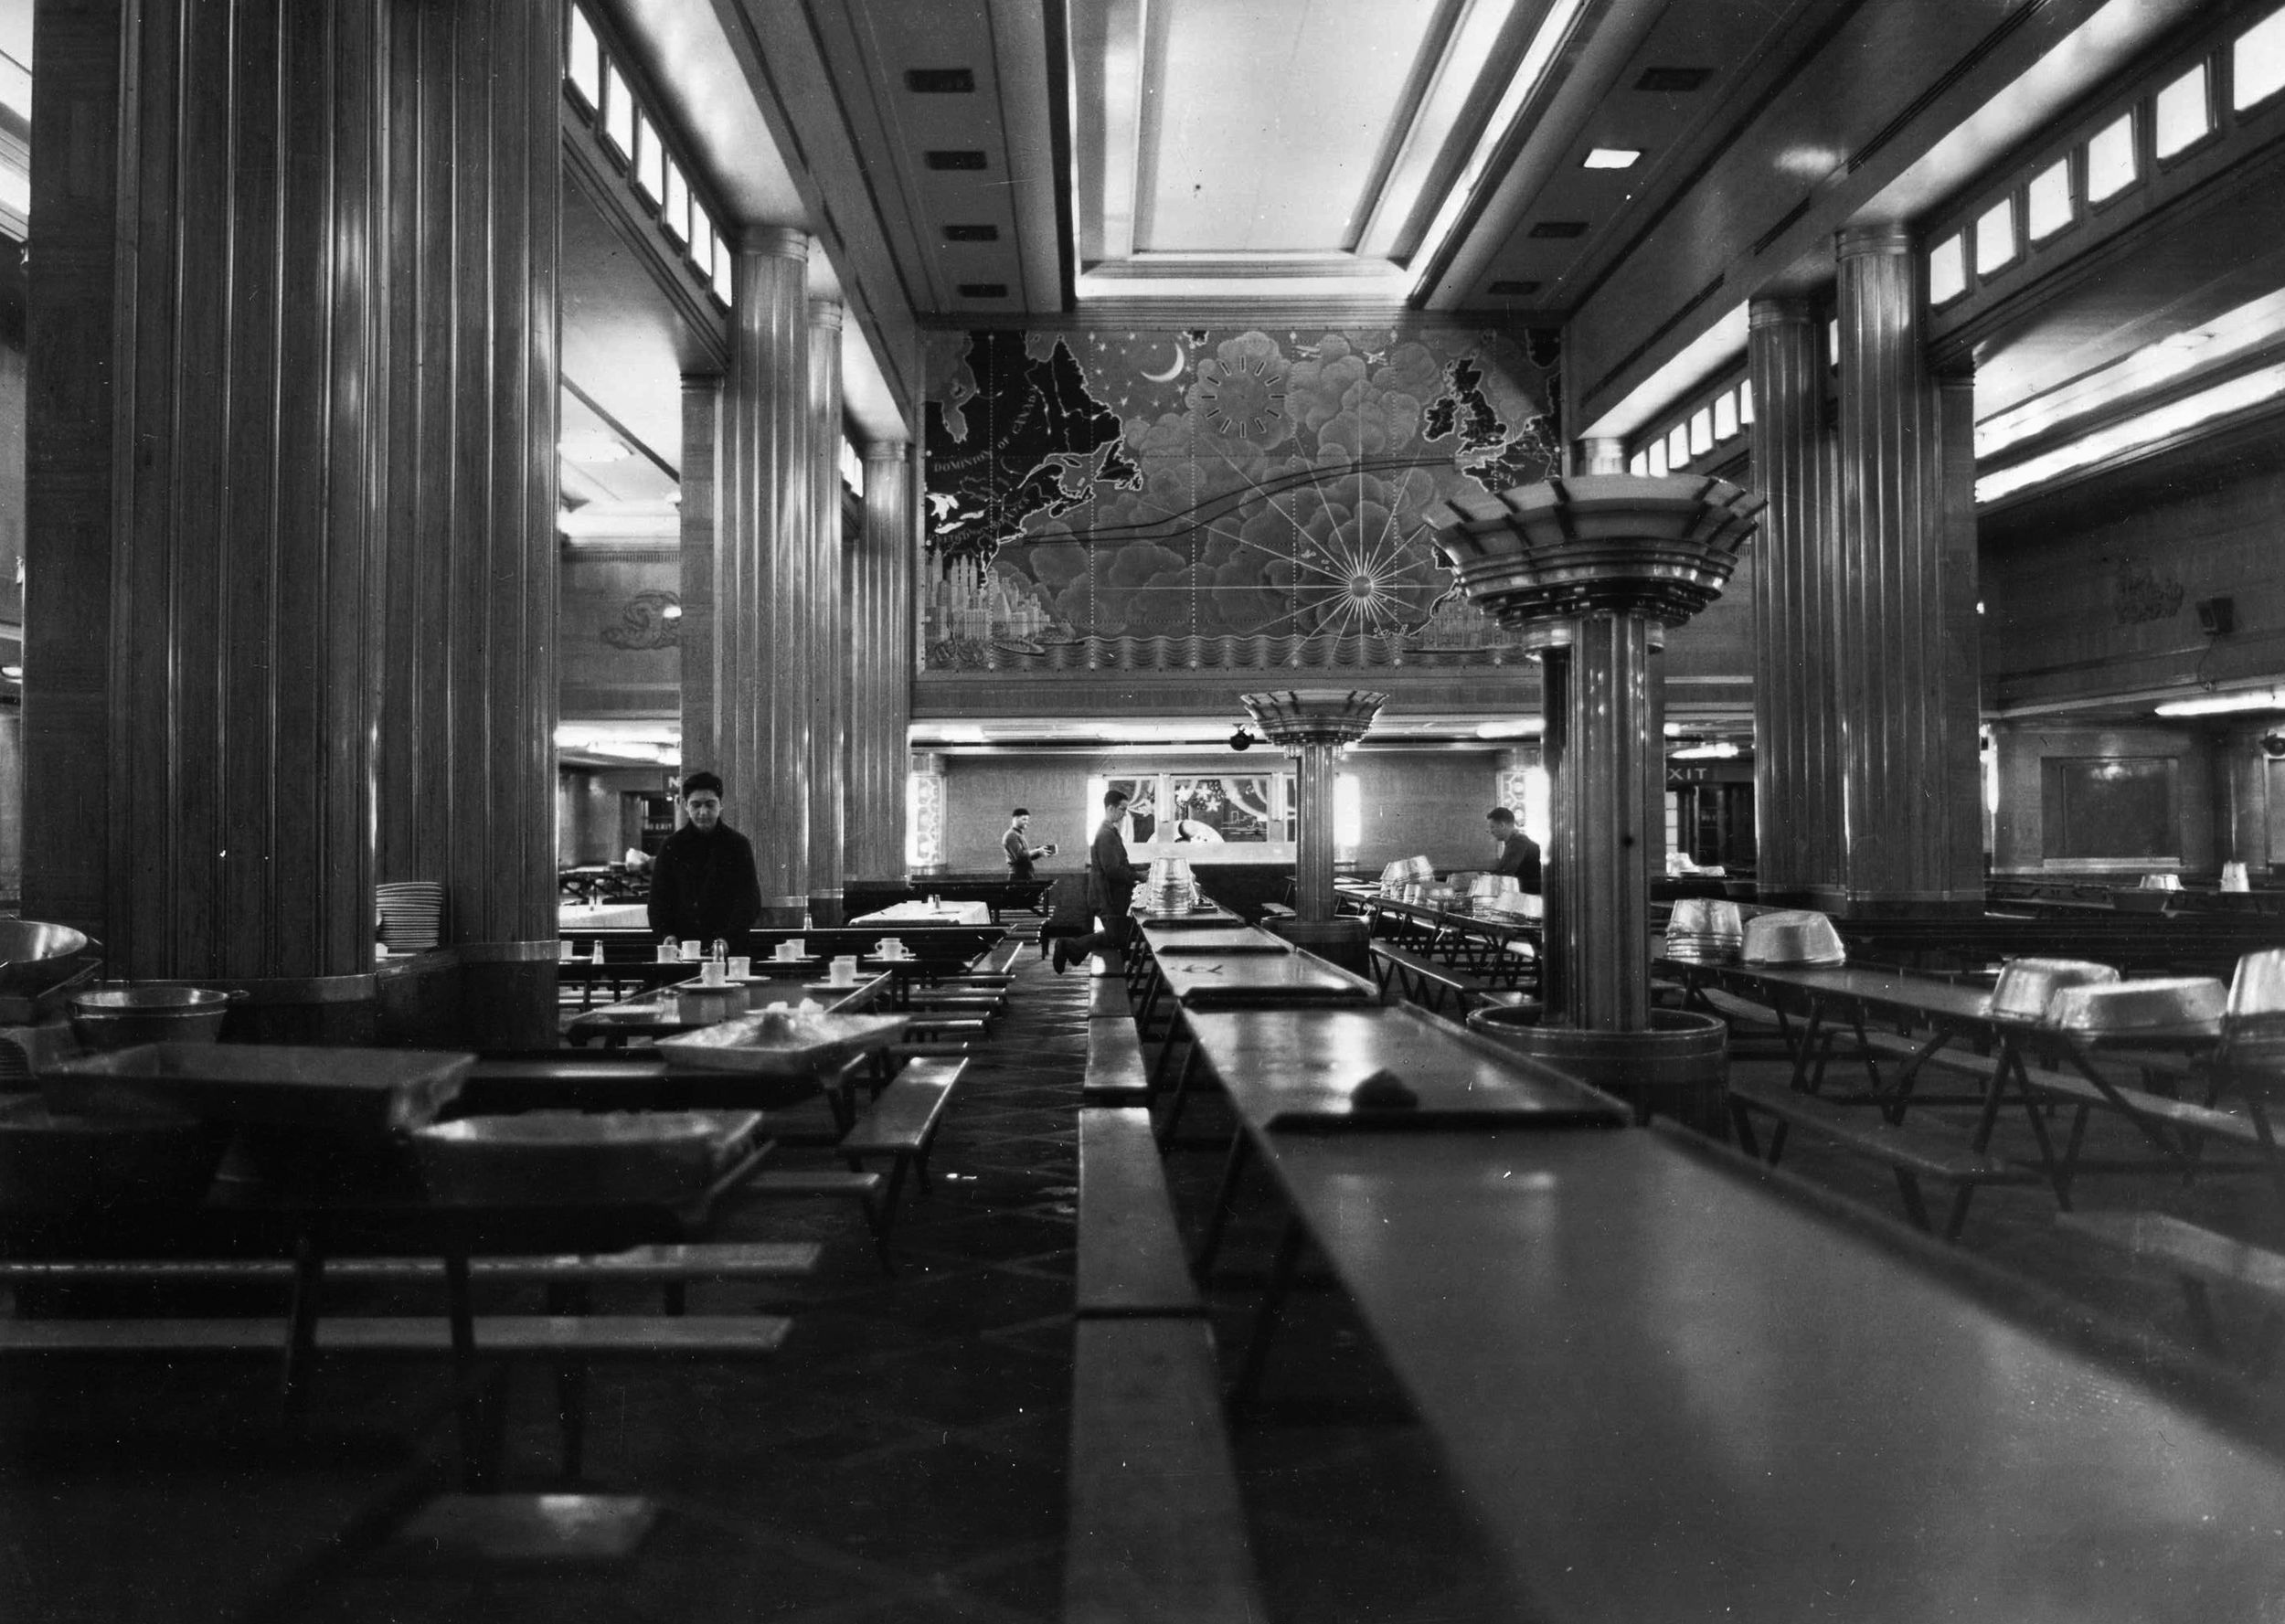 The peacetime opulence of the Queen Mary could not be hidden during the war. Here, the finery of the main dining room is apparent. Known to the troops the ship carried as the main “mess hall,” the area could accommodate 2,000 men at a single sitting. 